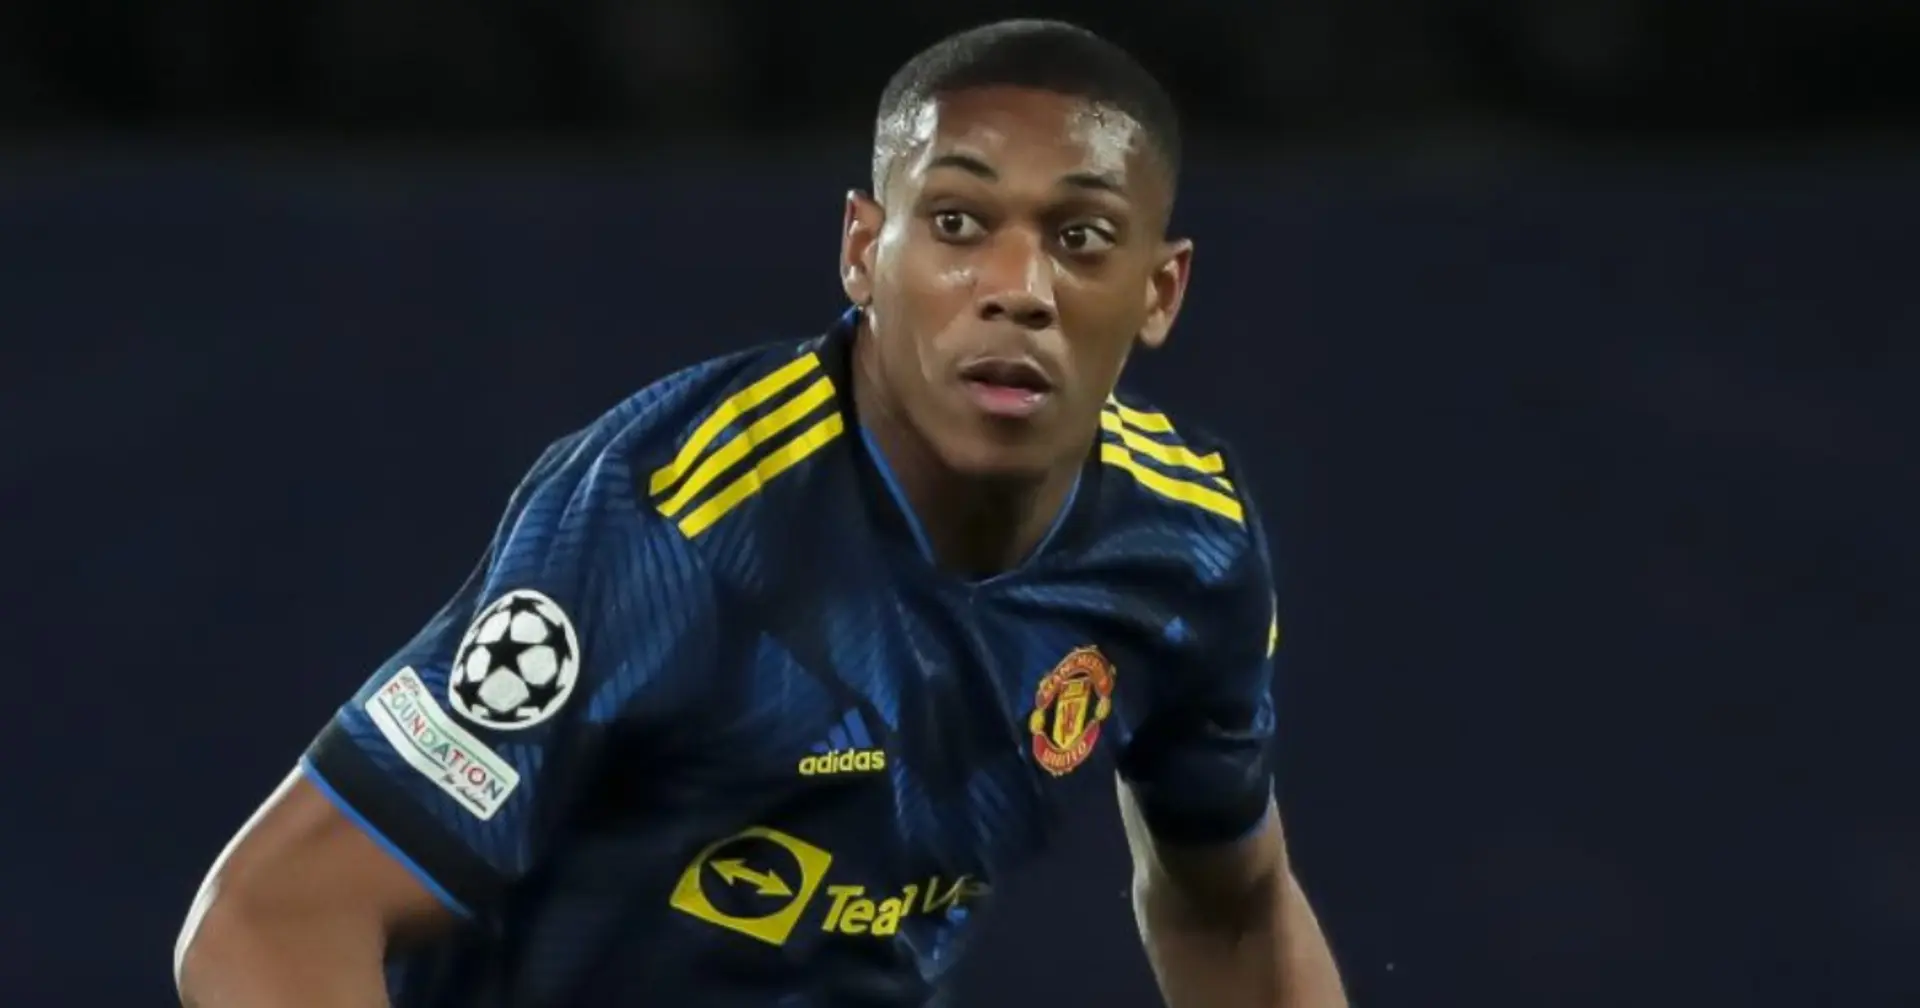 Juventus keen on Anthony Martial loan move this January (reliability: 5 stars)